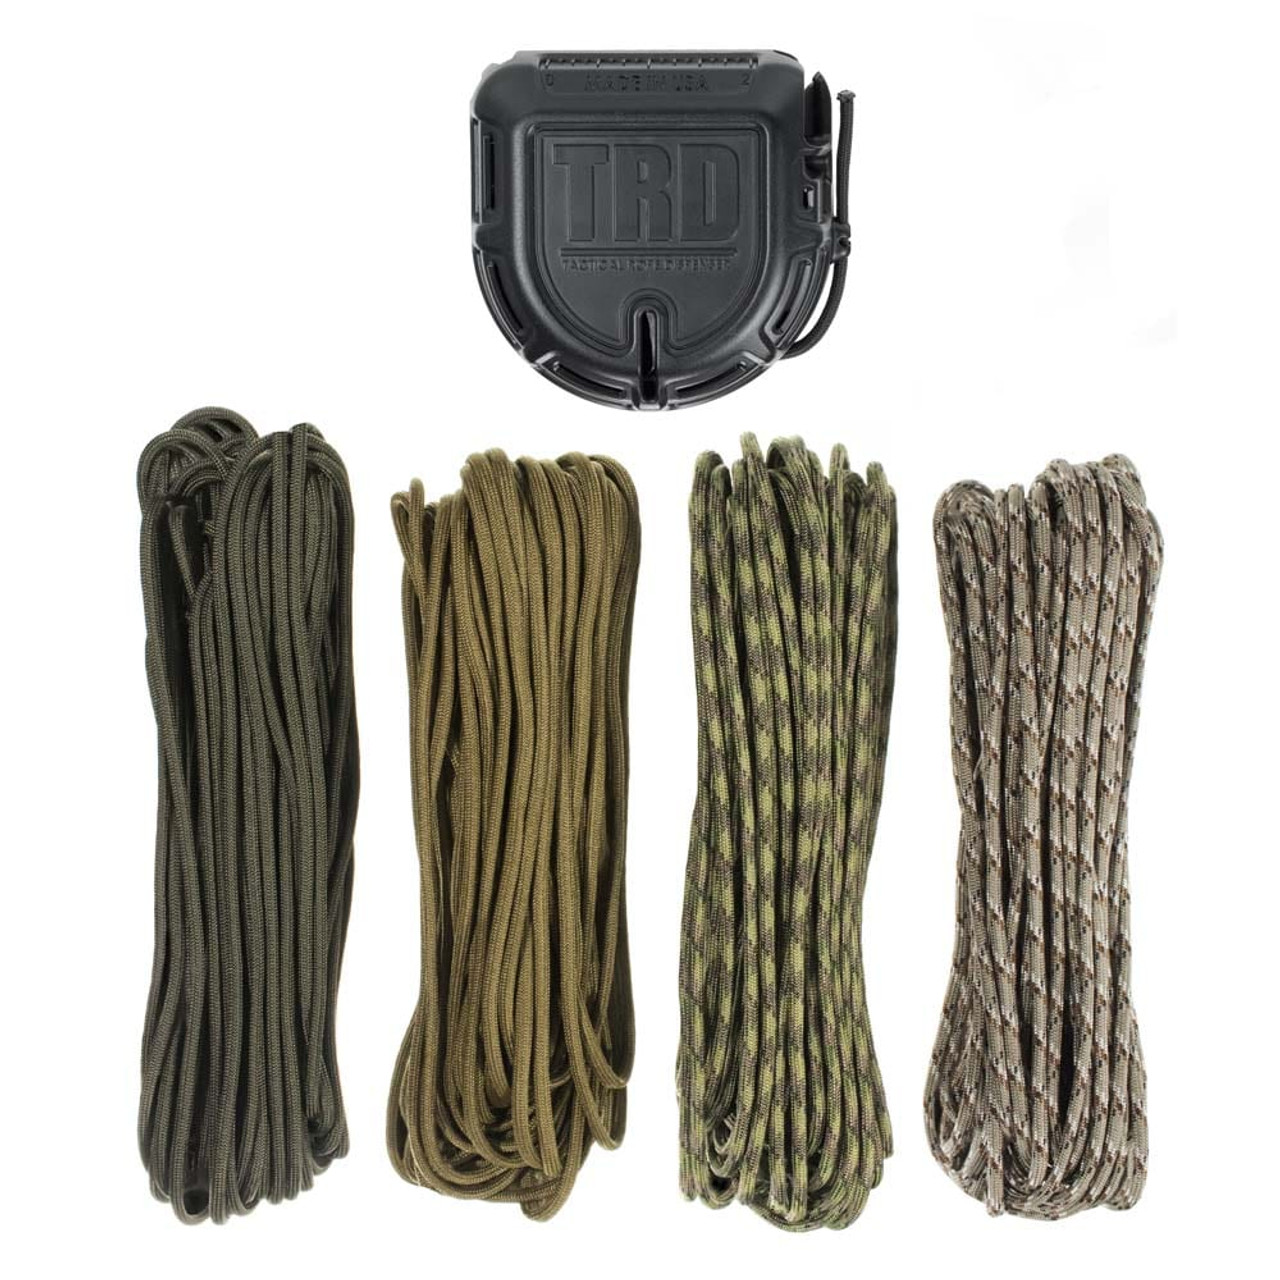 Tactical Rope Dispenser with 200' of Paracord - Military